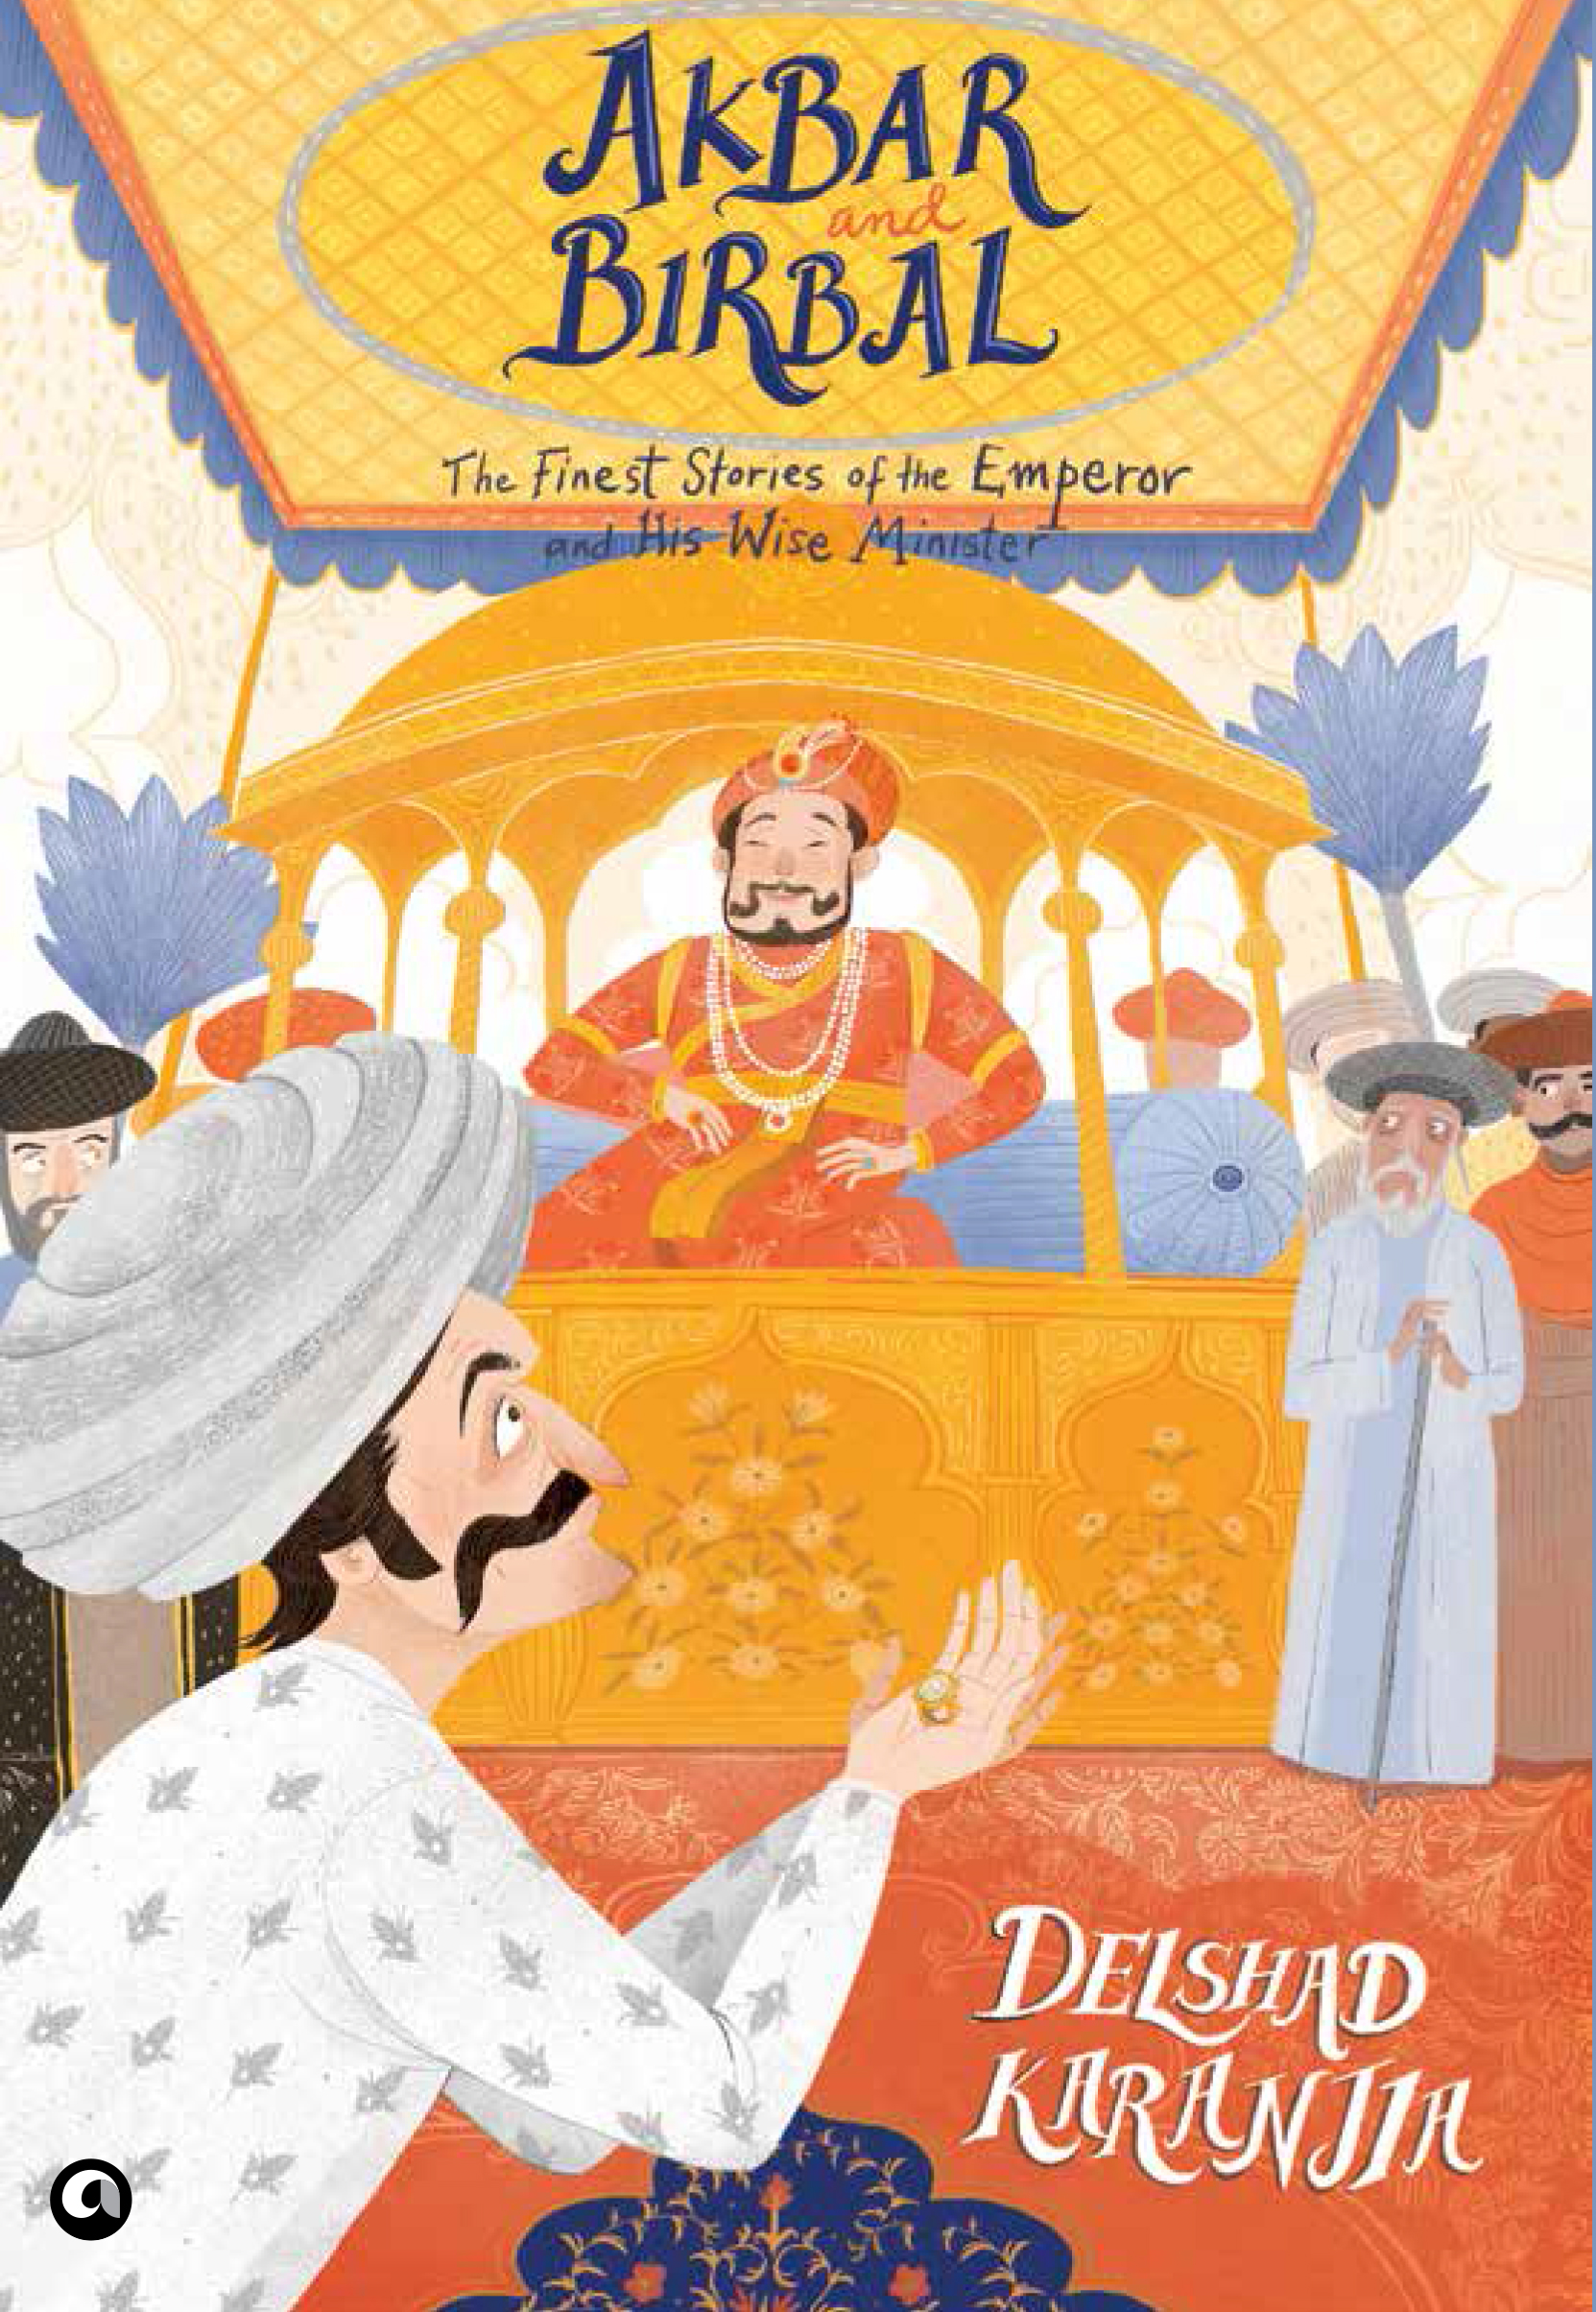 Akbar and Birbal: The Finest Stories of the Emperor and His Wise Wazir